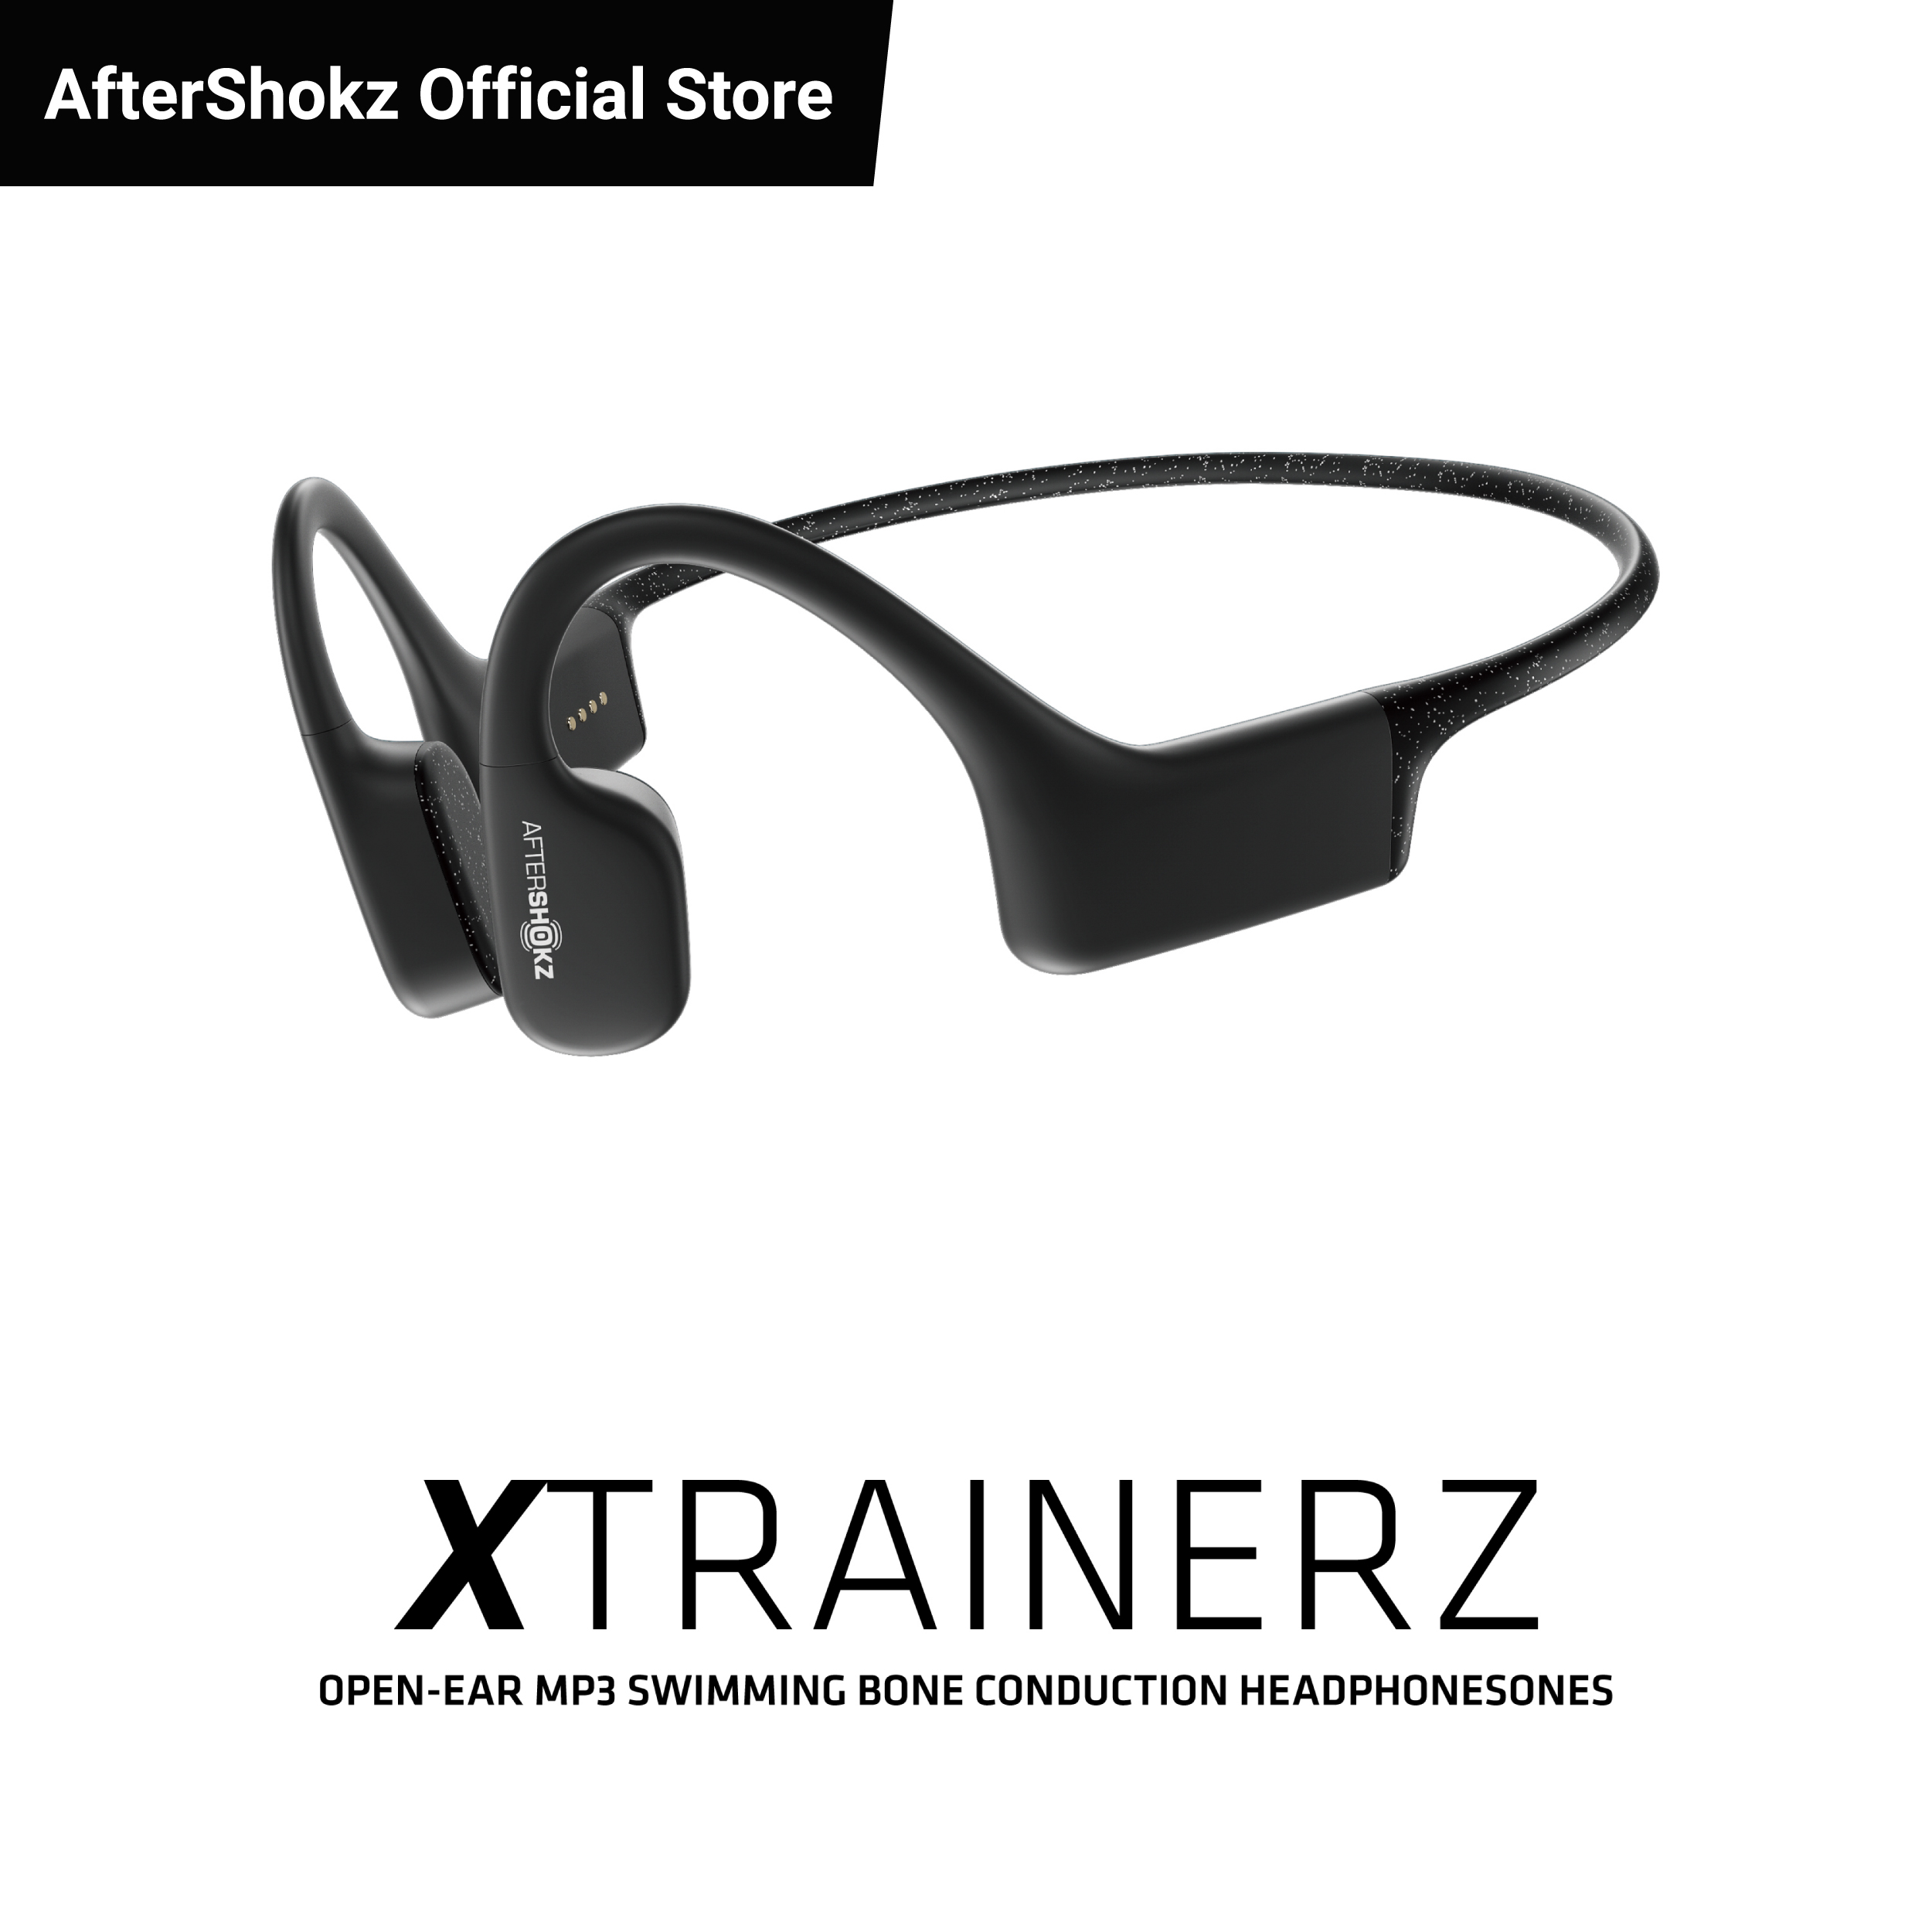 AFTERSHOKZ Xtrainerz Open-Ear MP3 Swimming Bone Conduction Headphones with 4GB memory